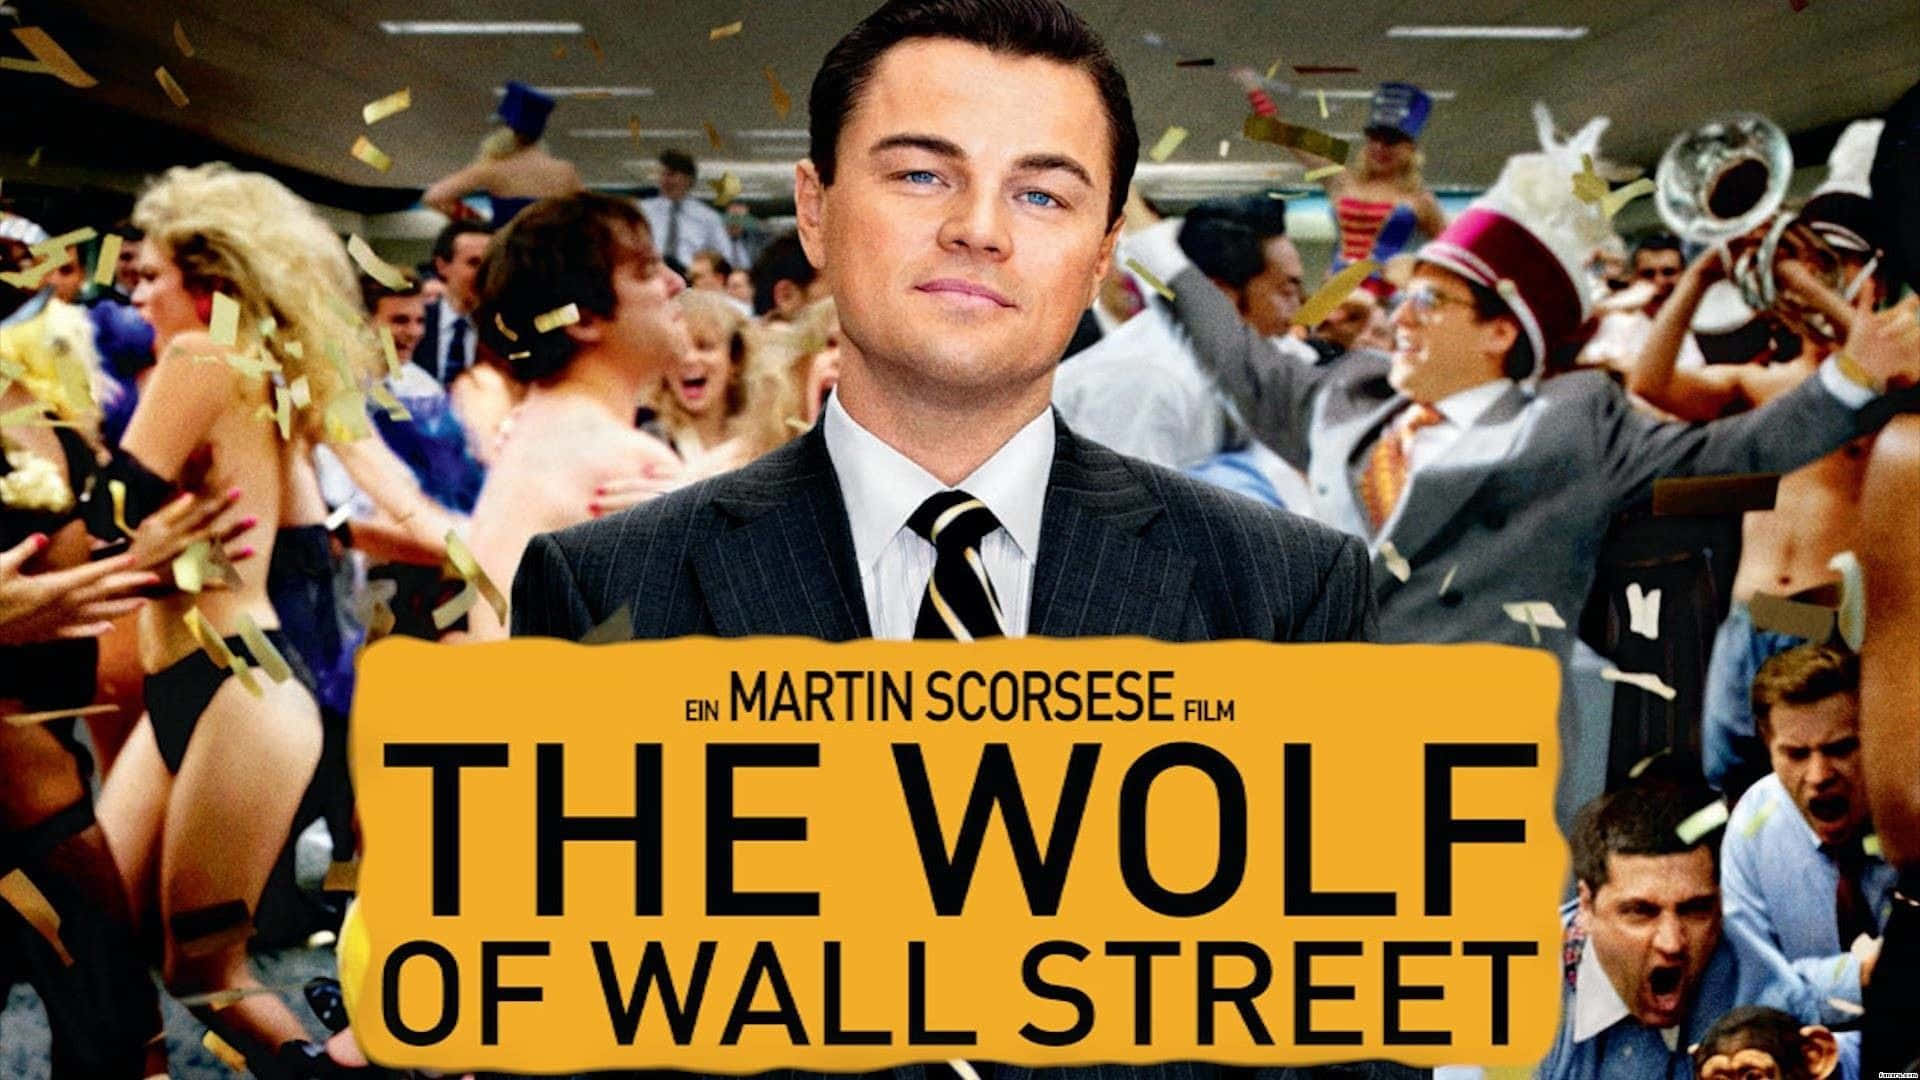 Follow the path of wealth and fame with The Wolf of Wall Street Wallpaper